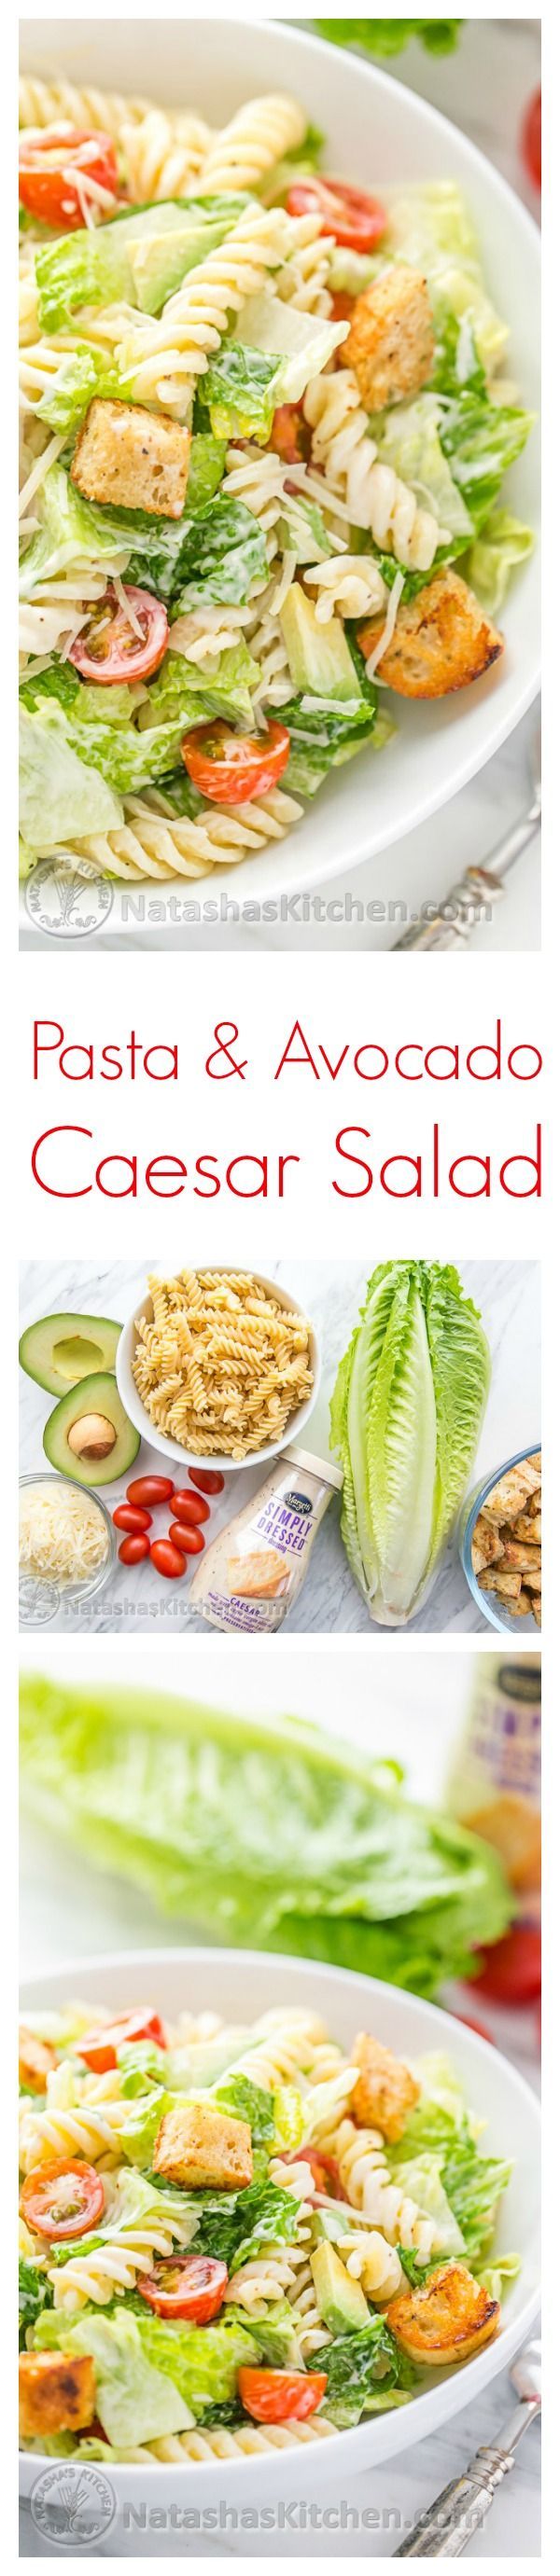 You have to try this Pasta Avocado Caesar Salad. Easy and family friendly weeknight meal! @natashaskitchen #sponsored by @Marzetti